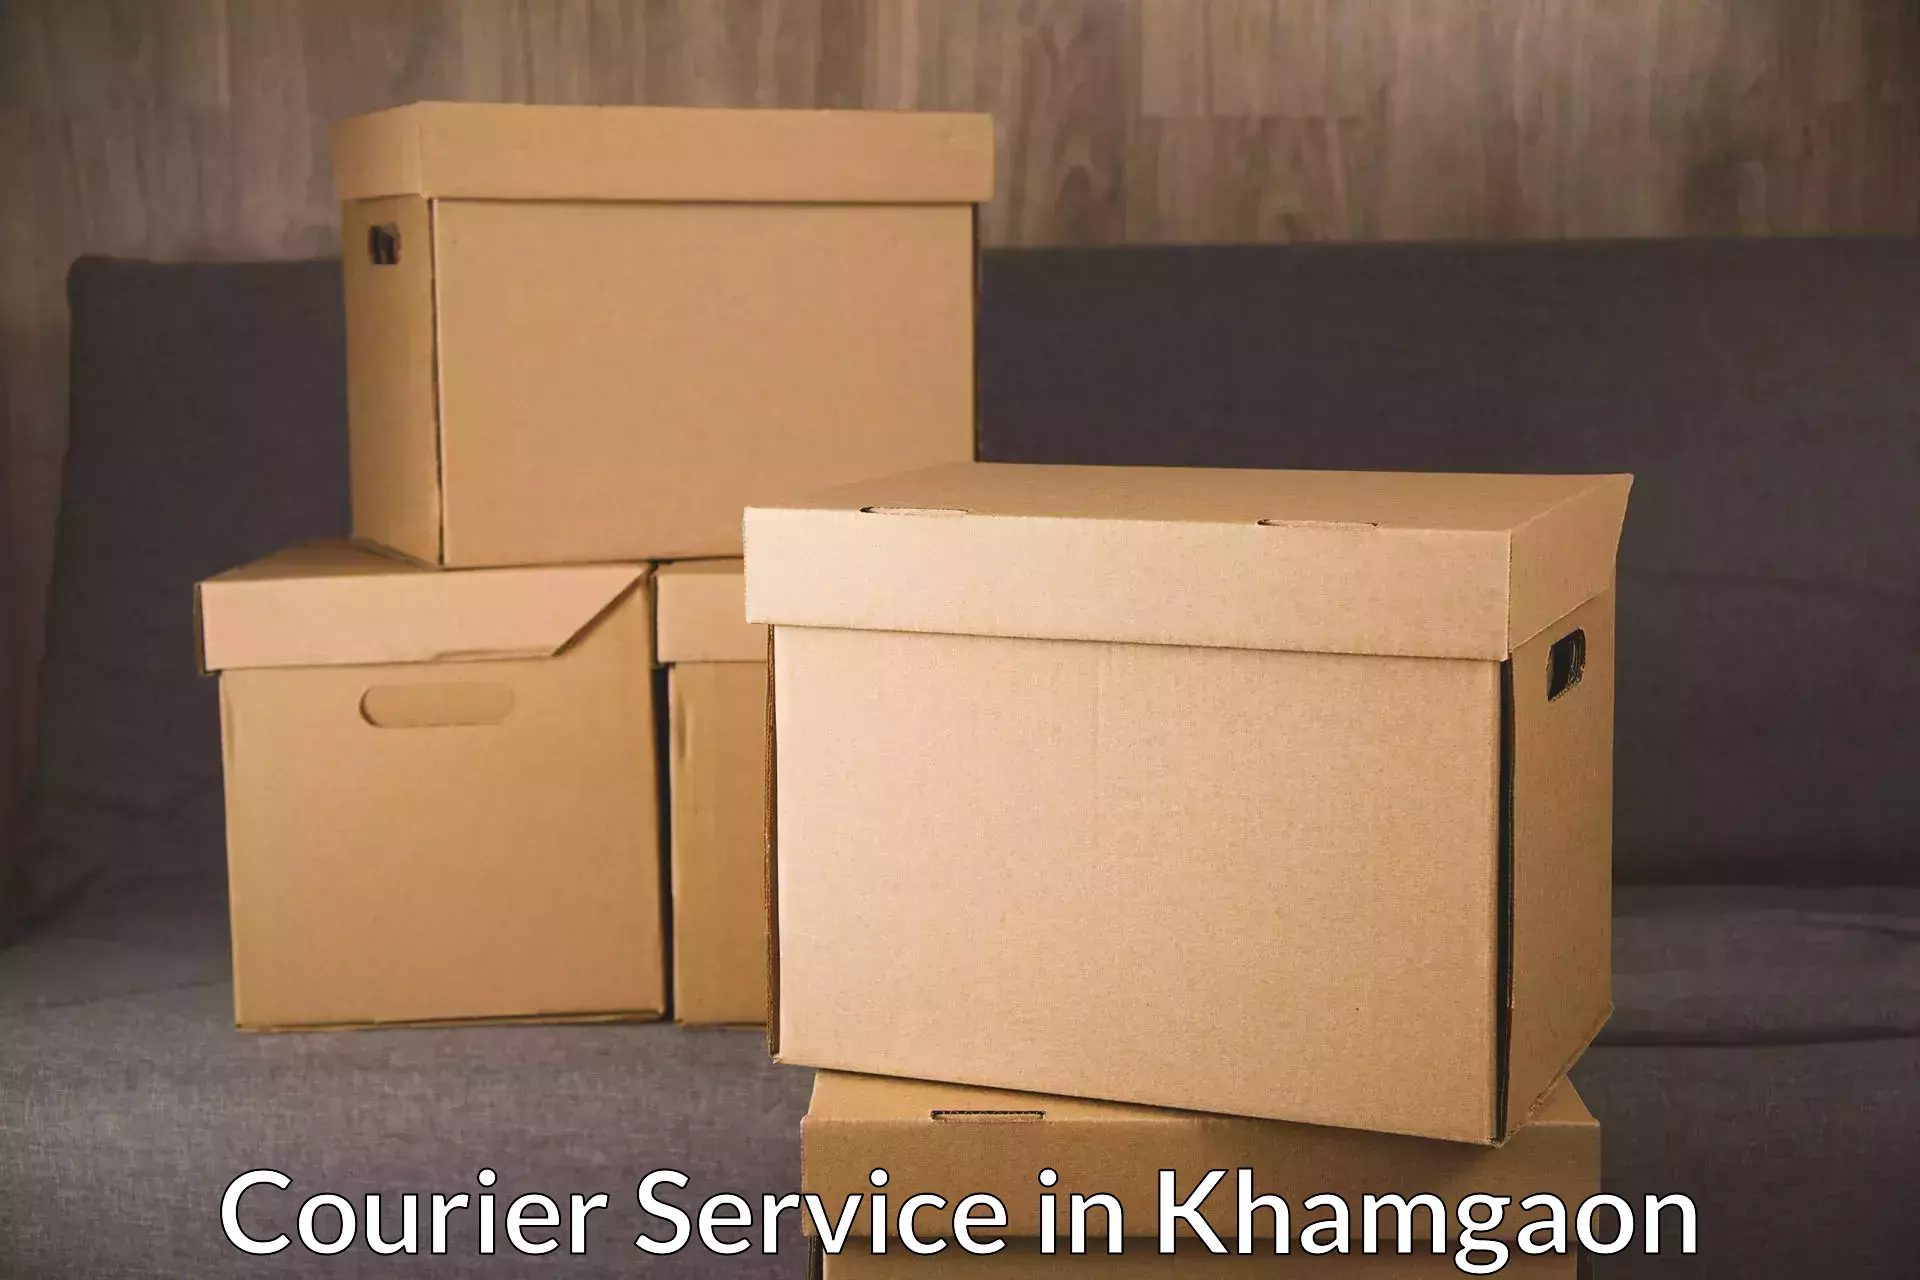 Online package tracking in Khamgaon